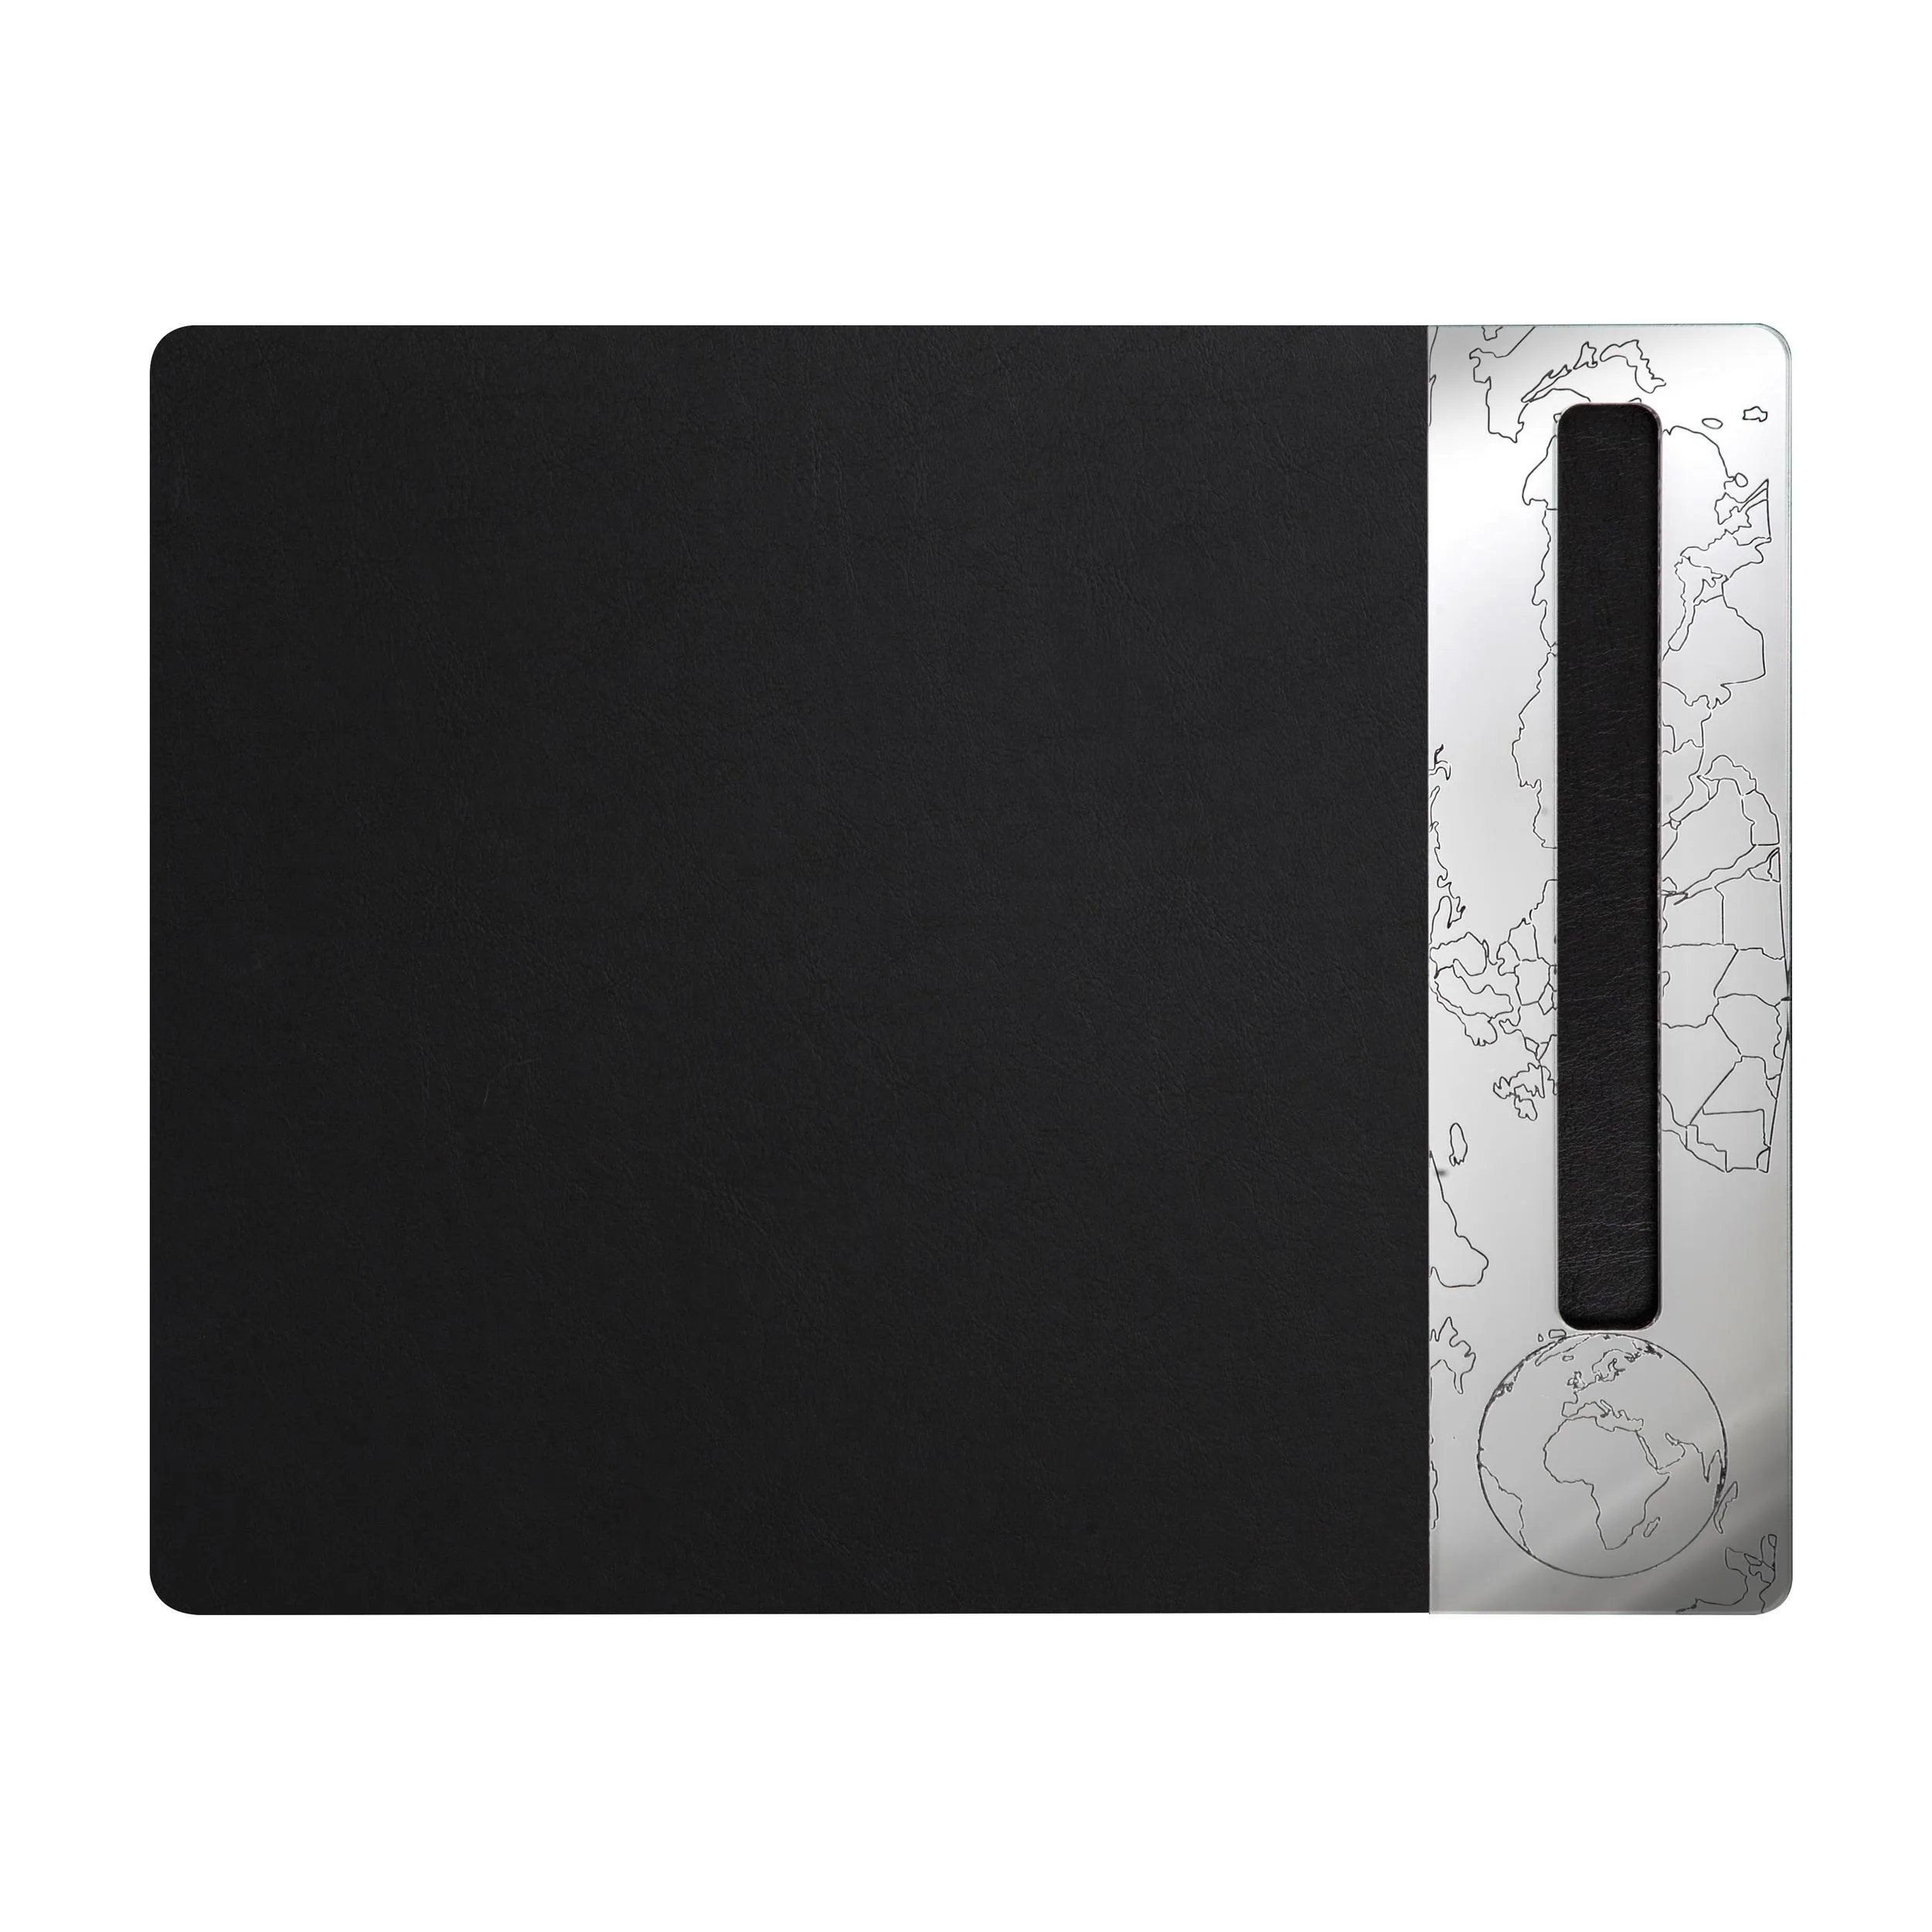 MOUSE PAD GLIDE GLOBAL THINKING ARGENT, 28.7x34.9H3 cm, colore Argento